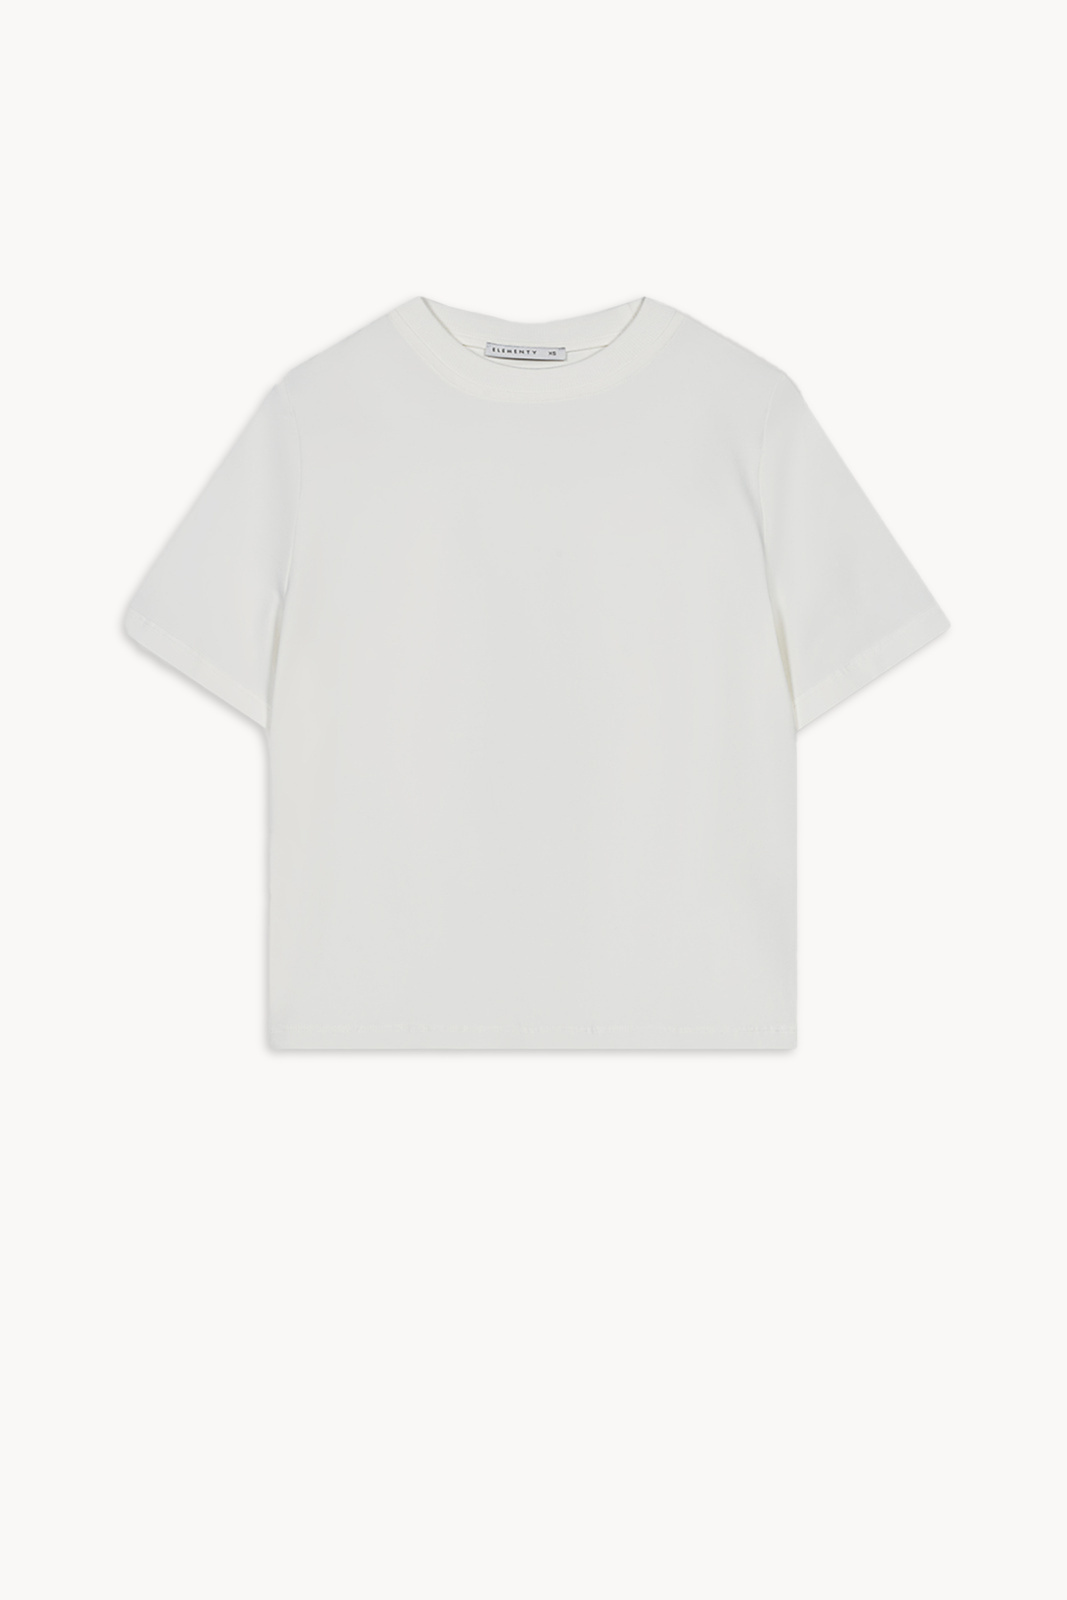 Data Lux T-shirt Off White 3 for 2 Elementy